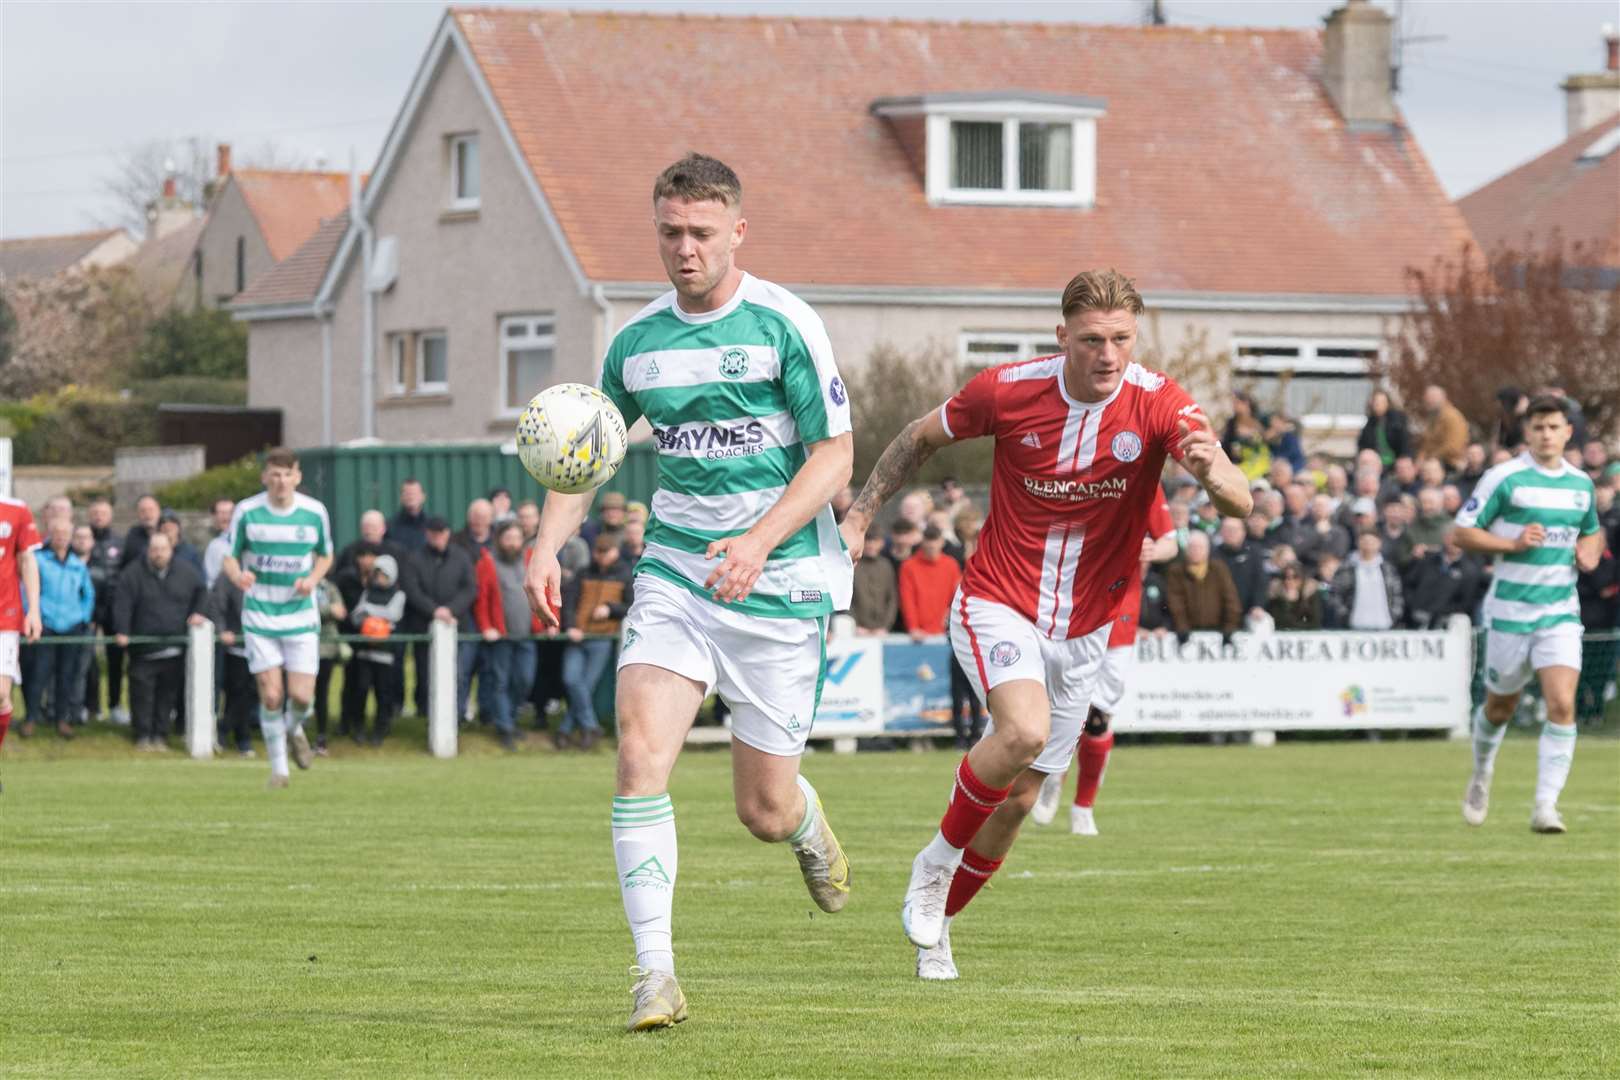 Buckie's Josh Peters pushing forward with the ball against Brechin's Hamish Thomson. ..Buckie Thistle F.C. v Brechin City F.C. Highland League Final at Victoria Park. ..Picture: Beth Taylor.